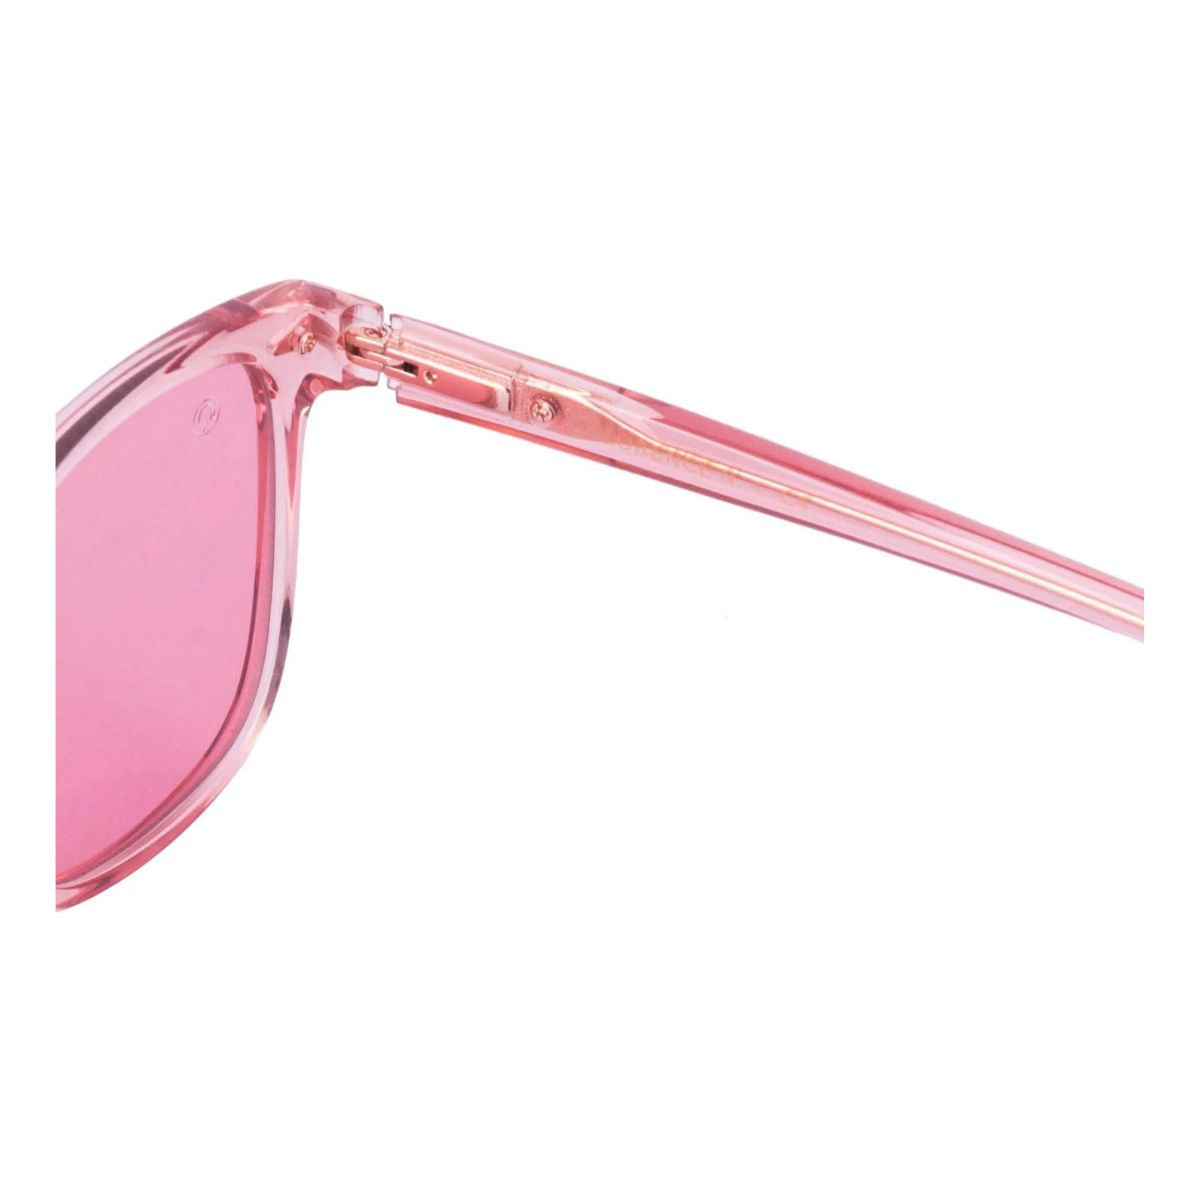 "Stylish The Monk Florence N C4 Sunglass For Women's Online At Optorium"